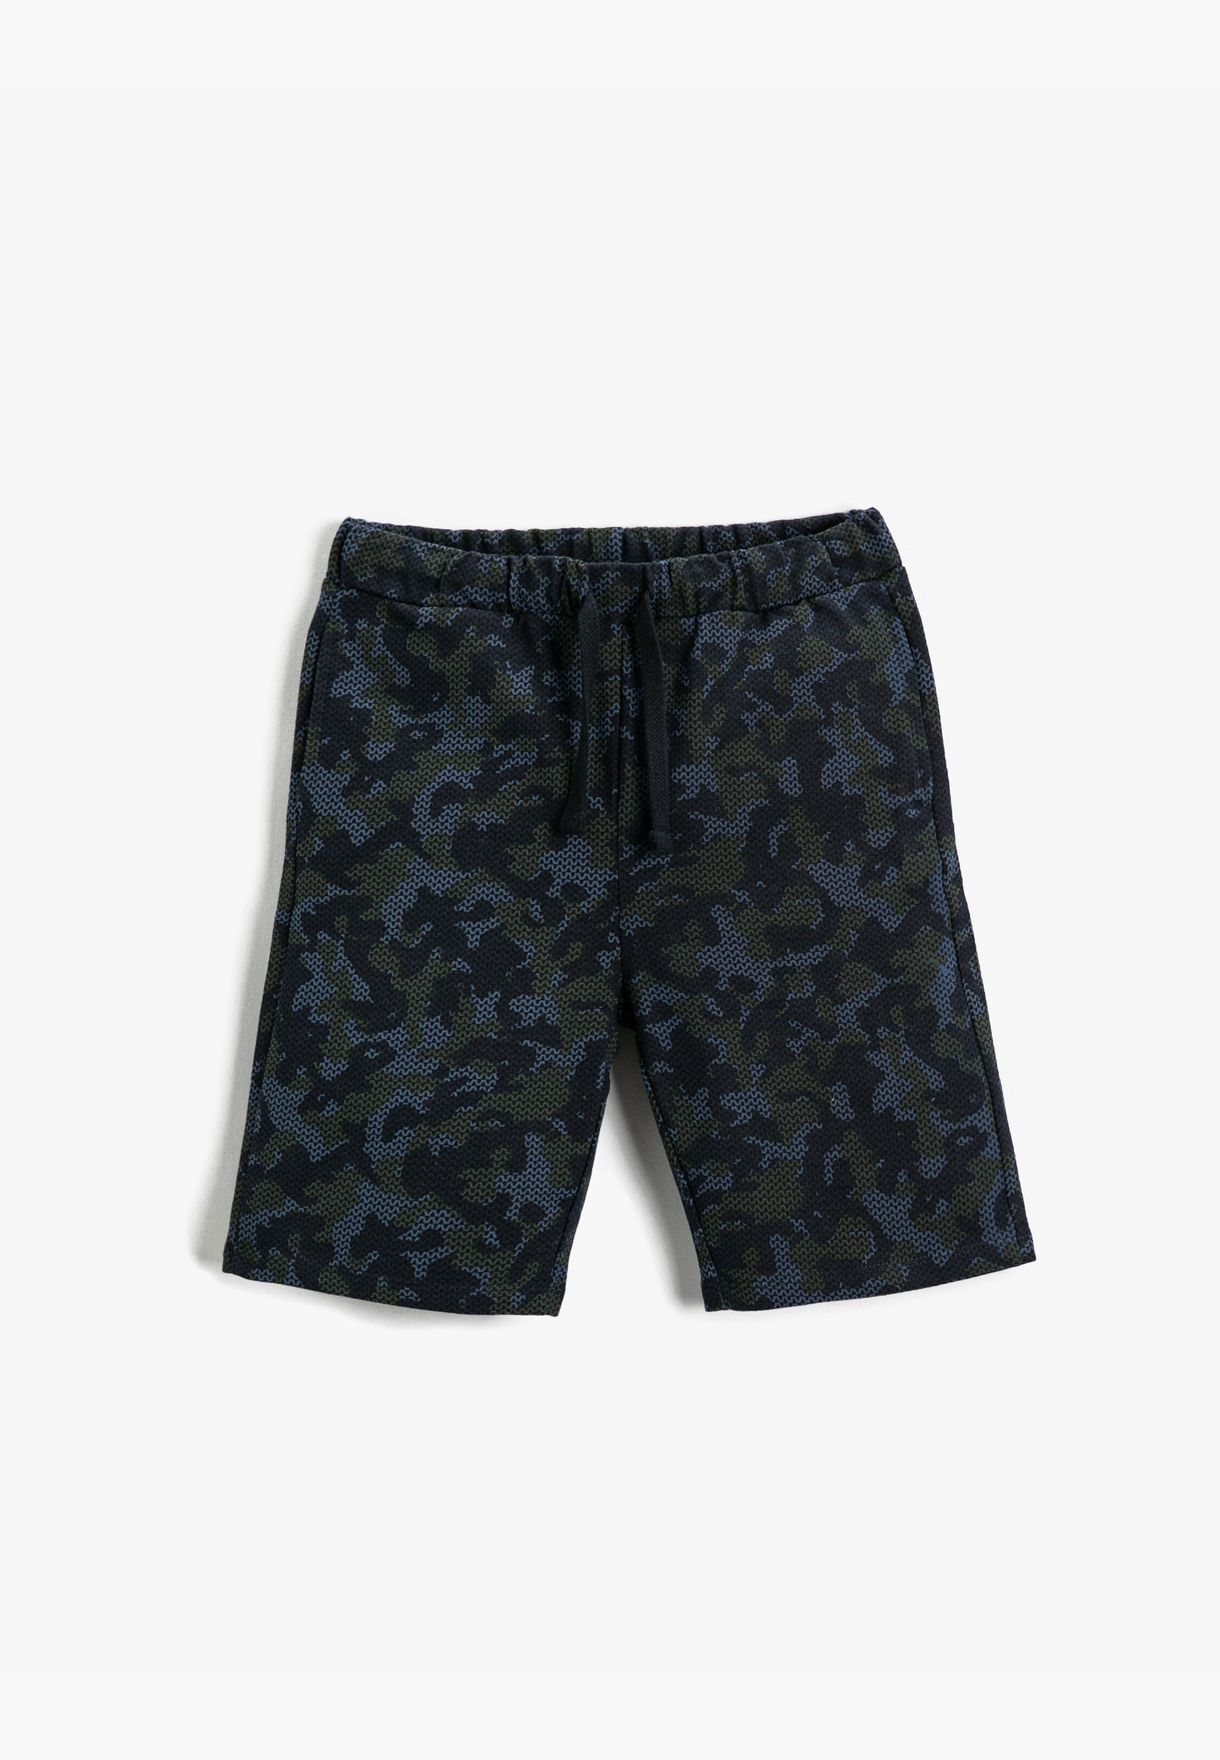 Camouflage Patterned Shorts Cotton